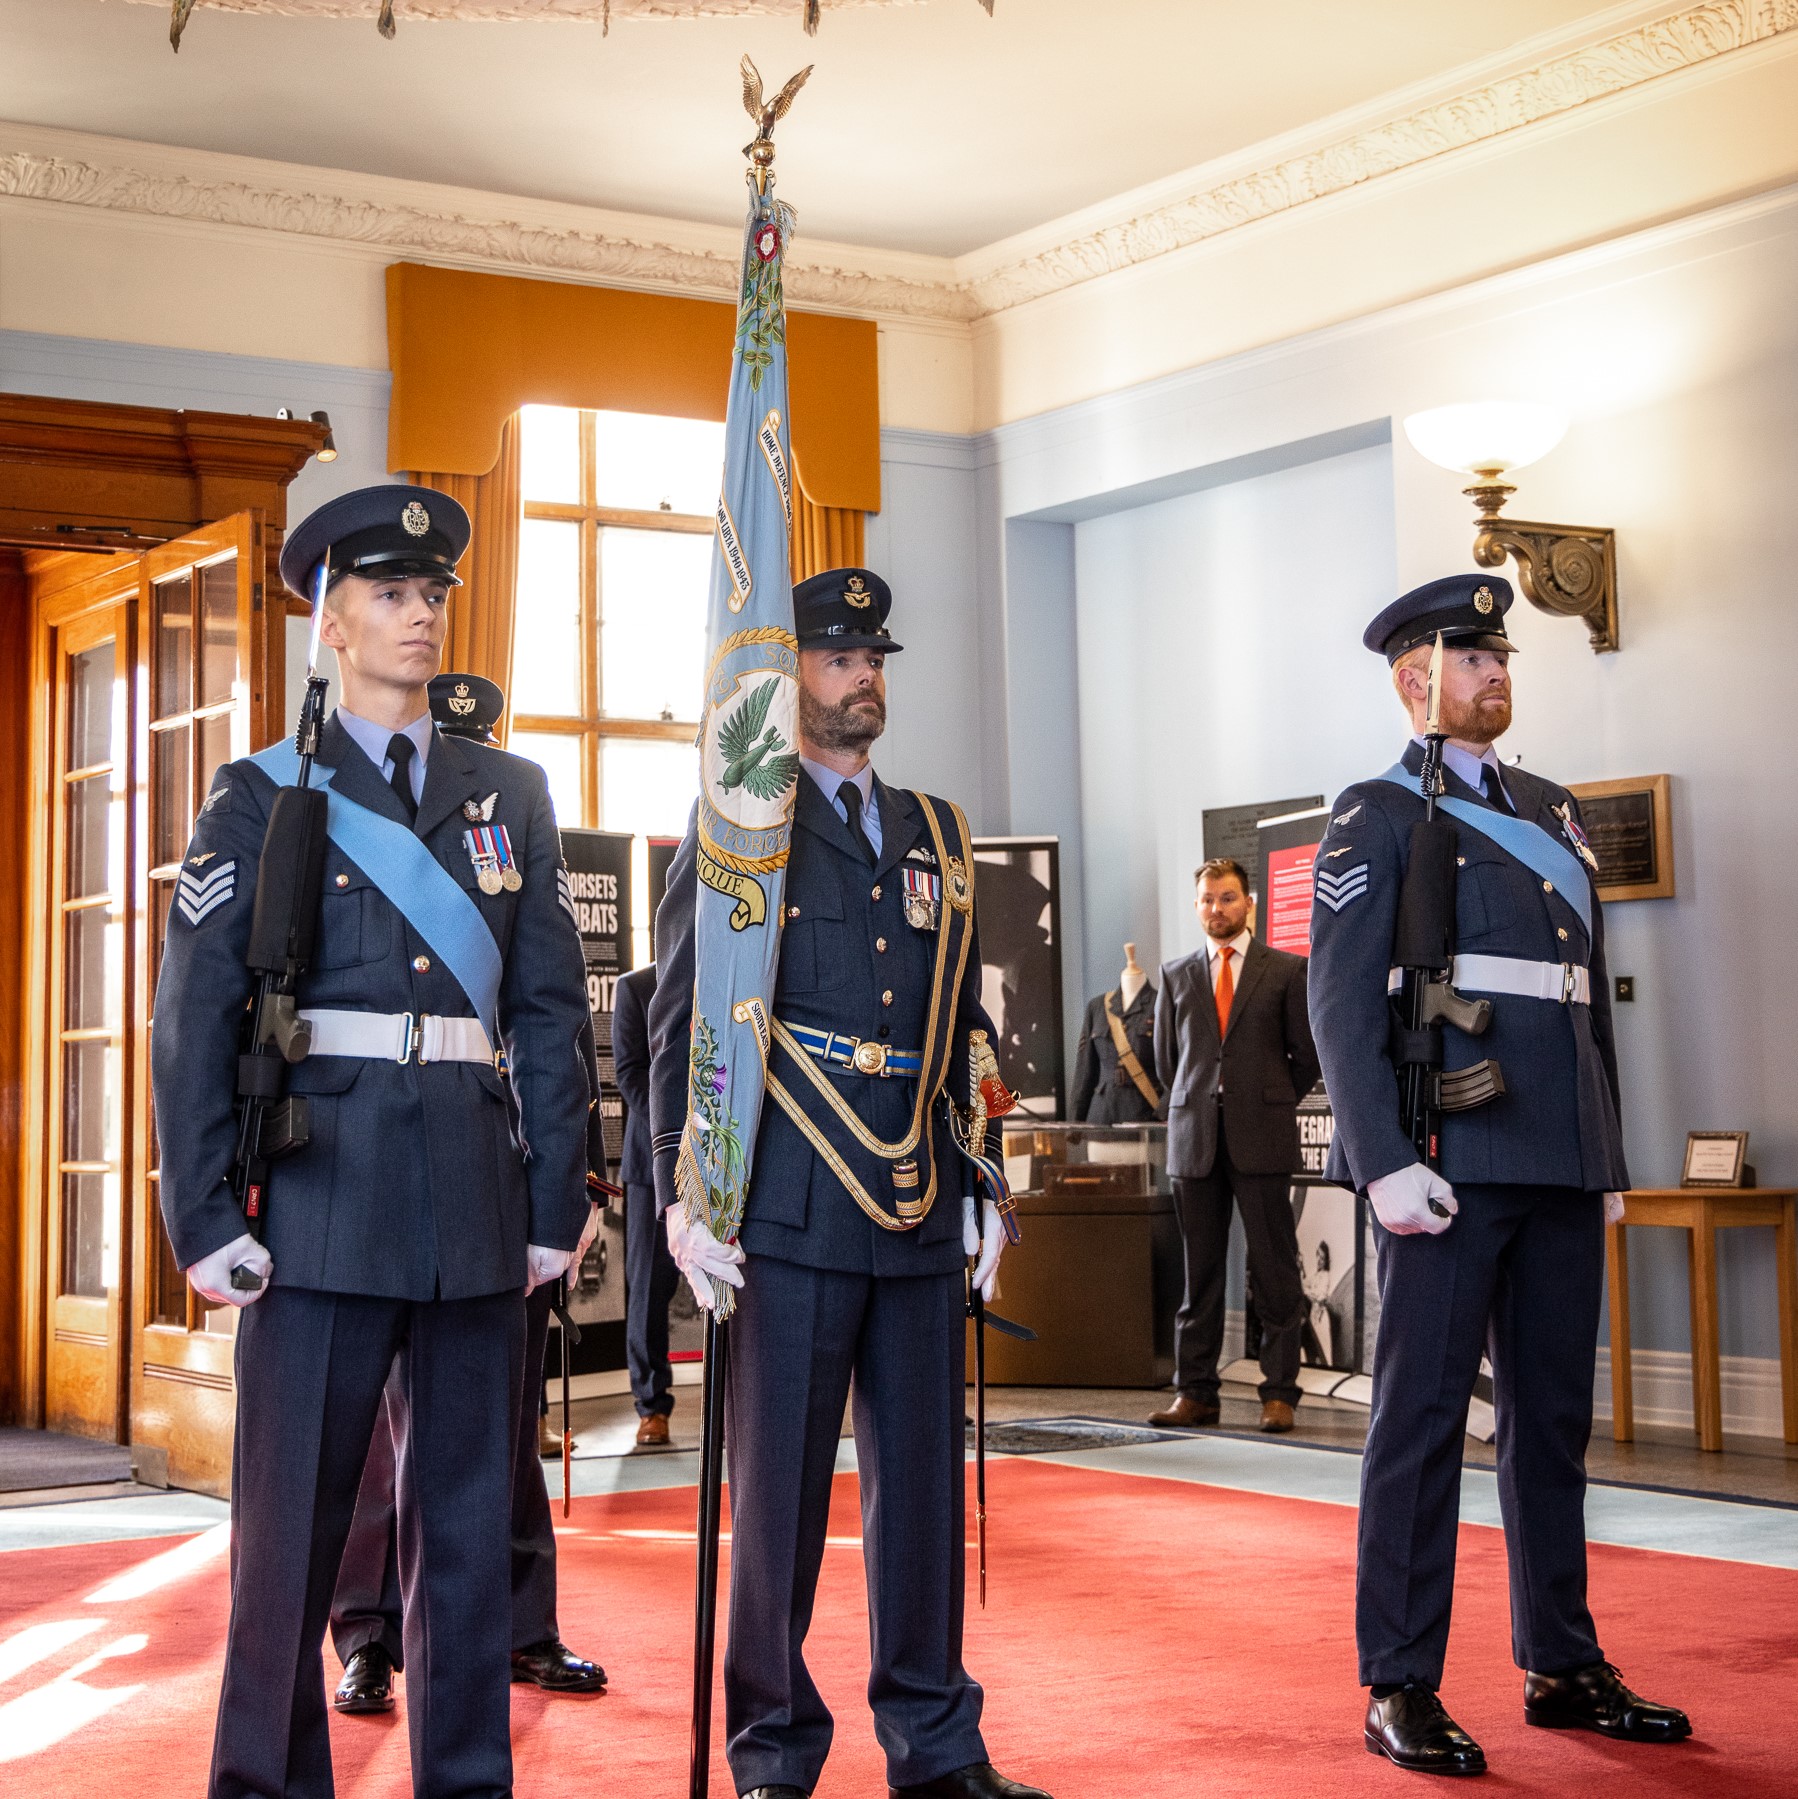 Image shows RAF aviators with colour standard inside Officers' Mess during ceremony.